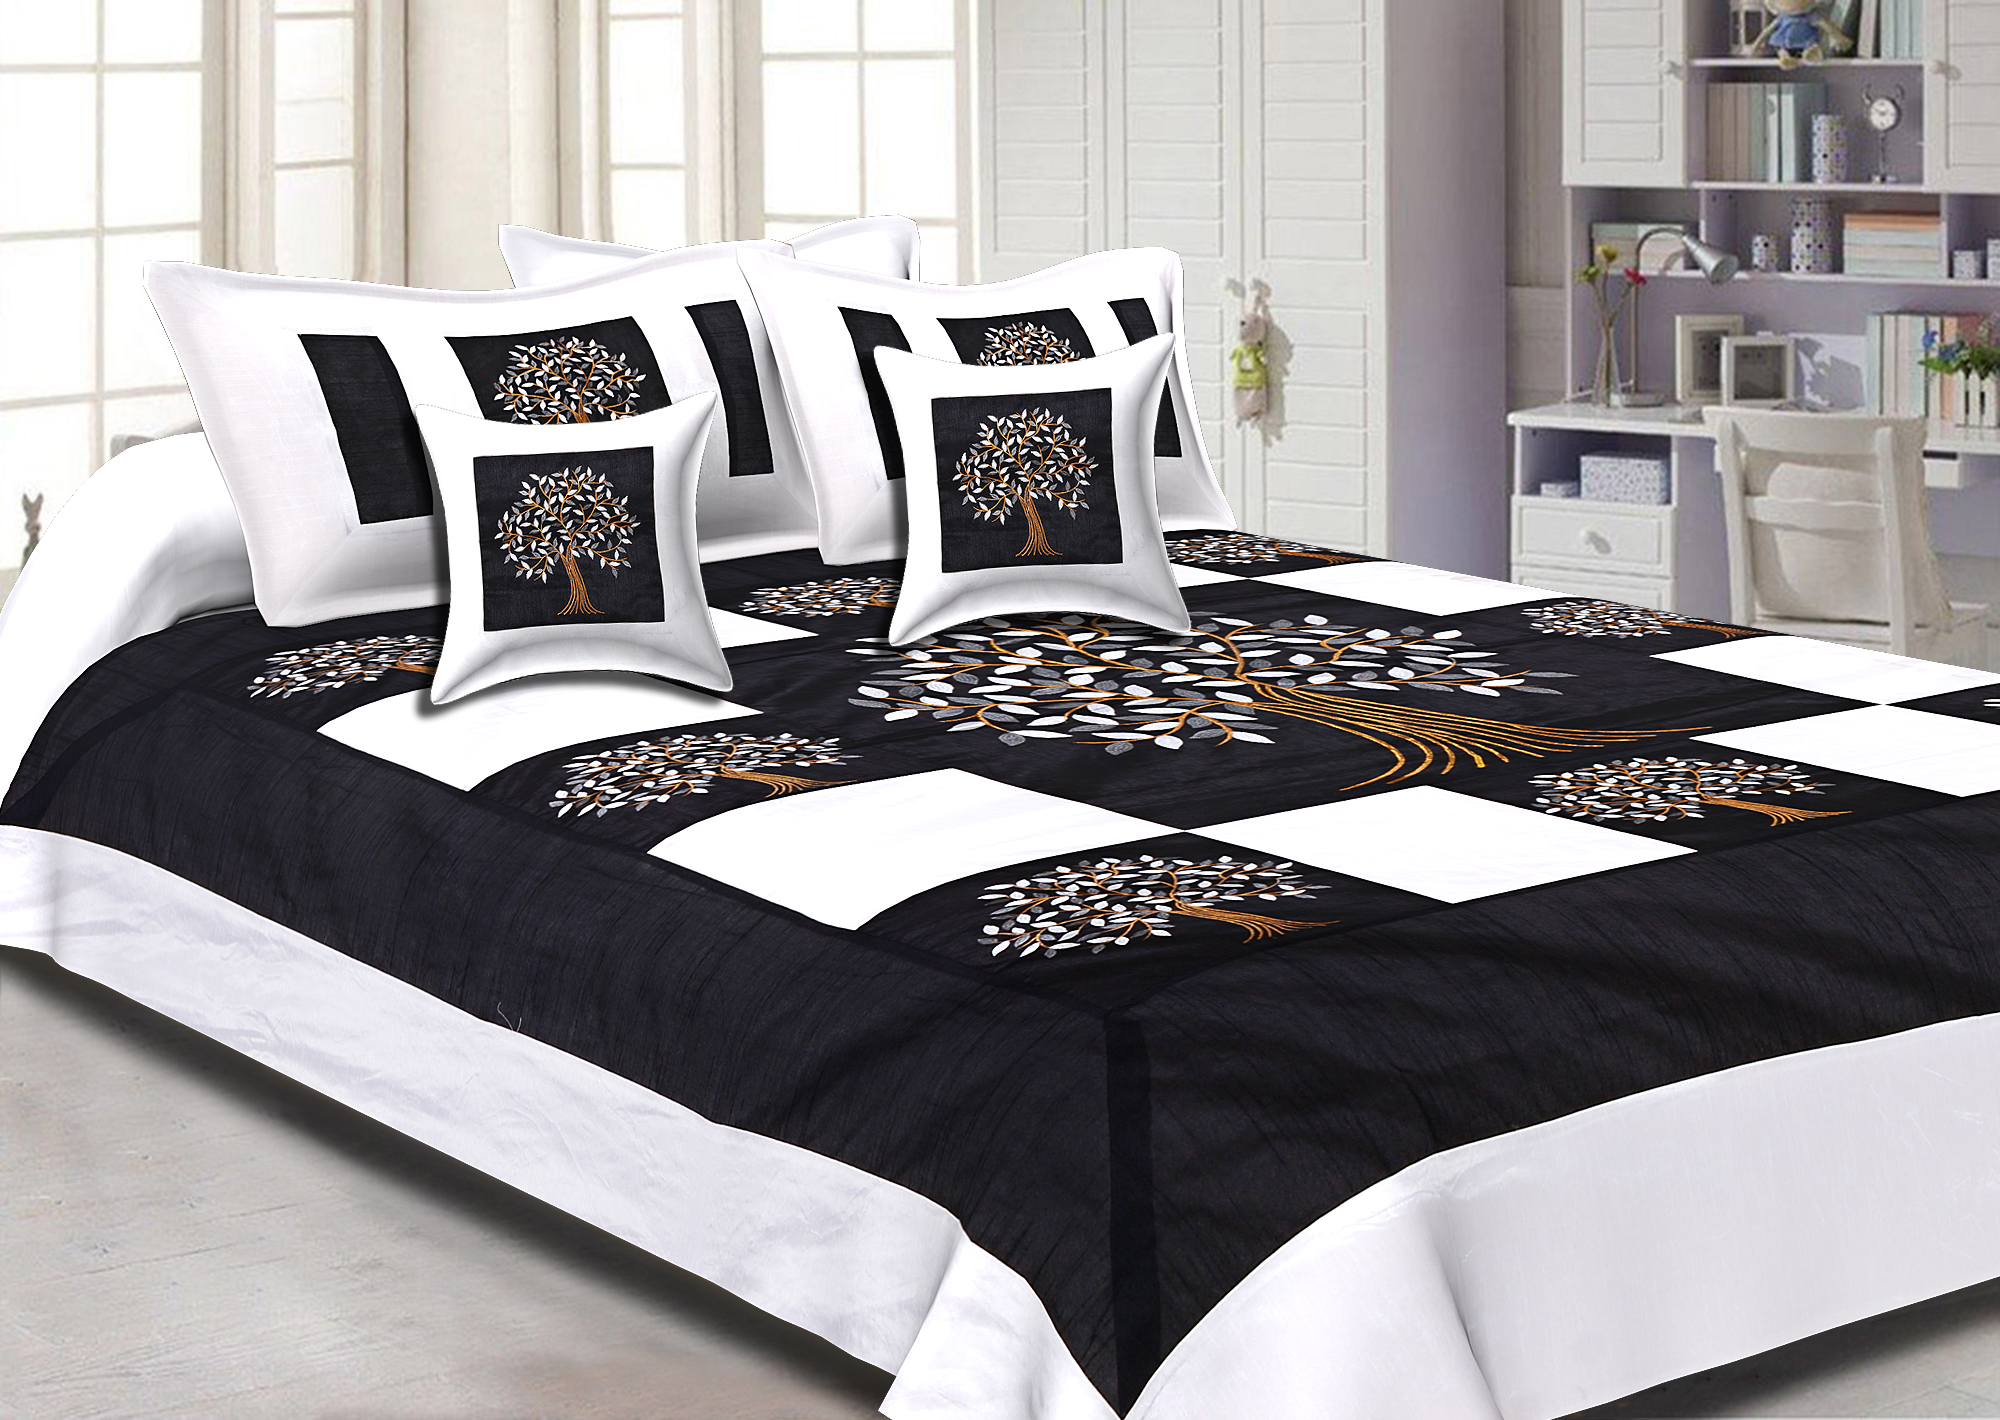 Black Base Machine Embroidery White Patch Work Silk Double Bed Sheet